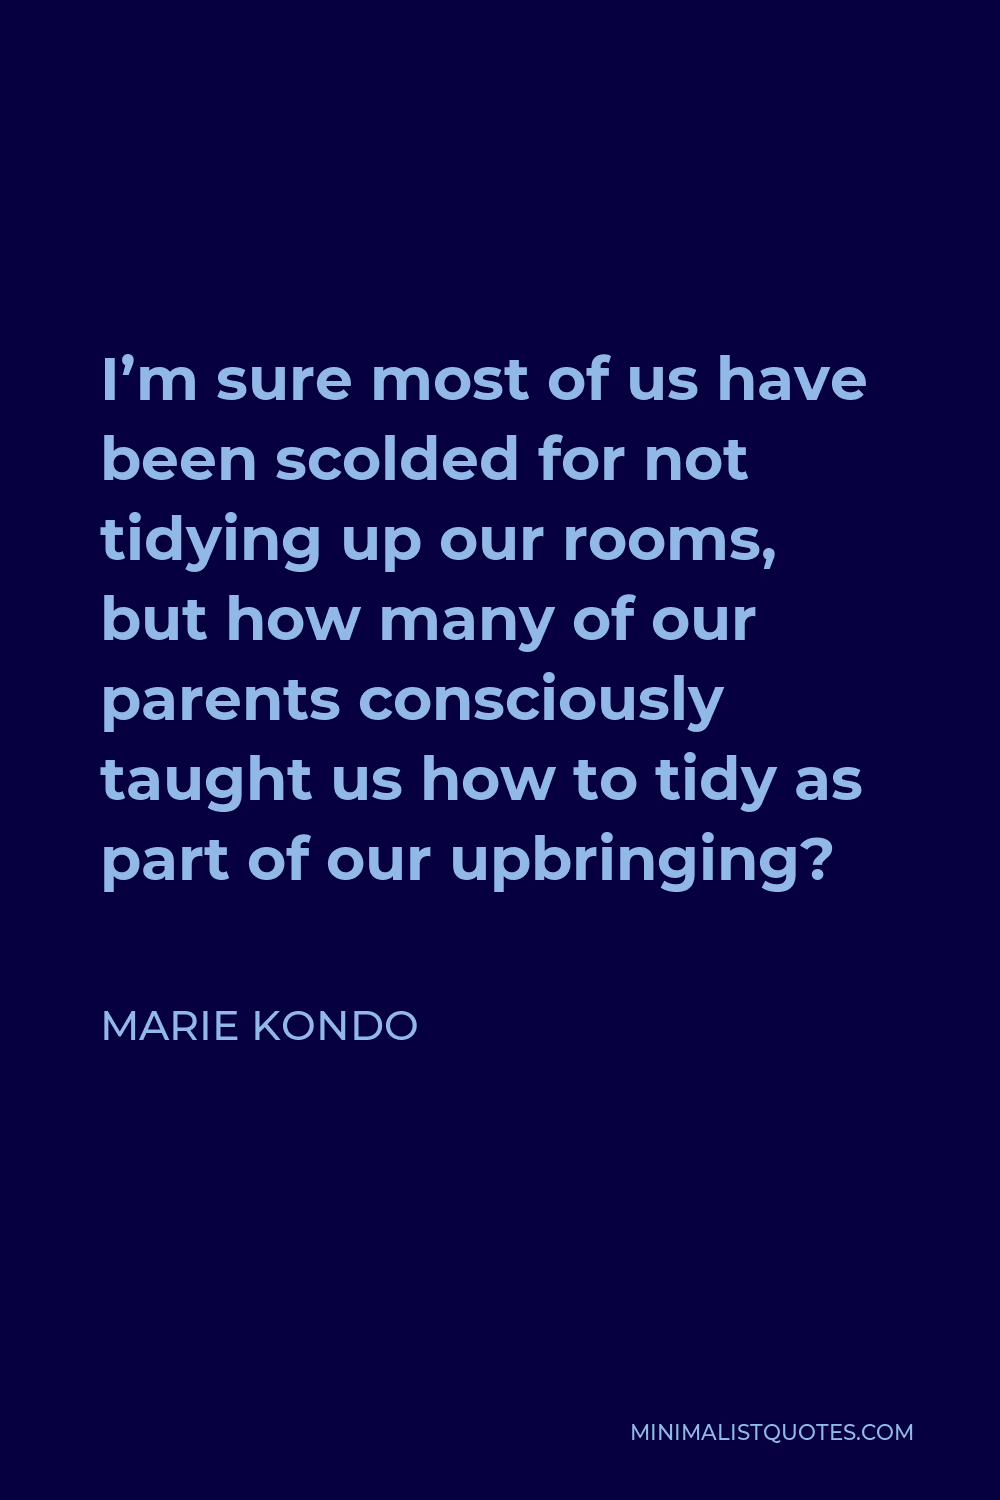 Marie Kondo Quote - I’m sure most of us have been scolded for not tidying up our rooms, but how many of our parents consciously taught us how to tidy as part of our upbringing?